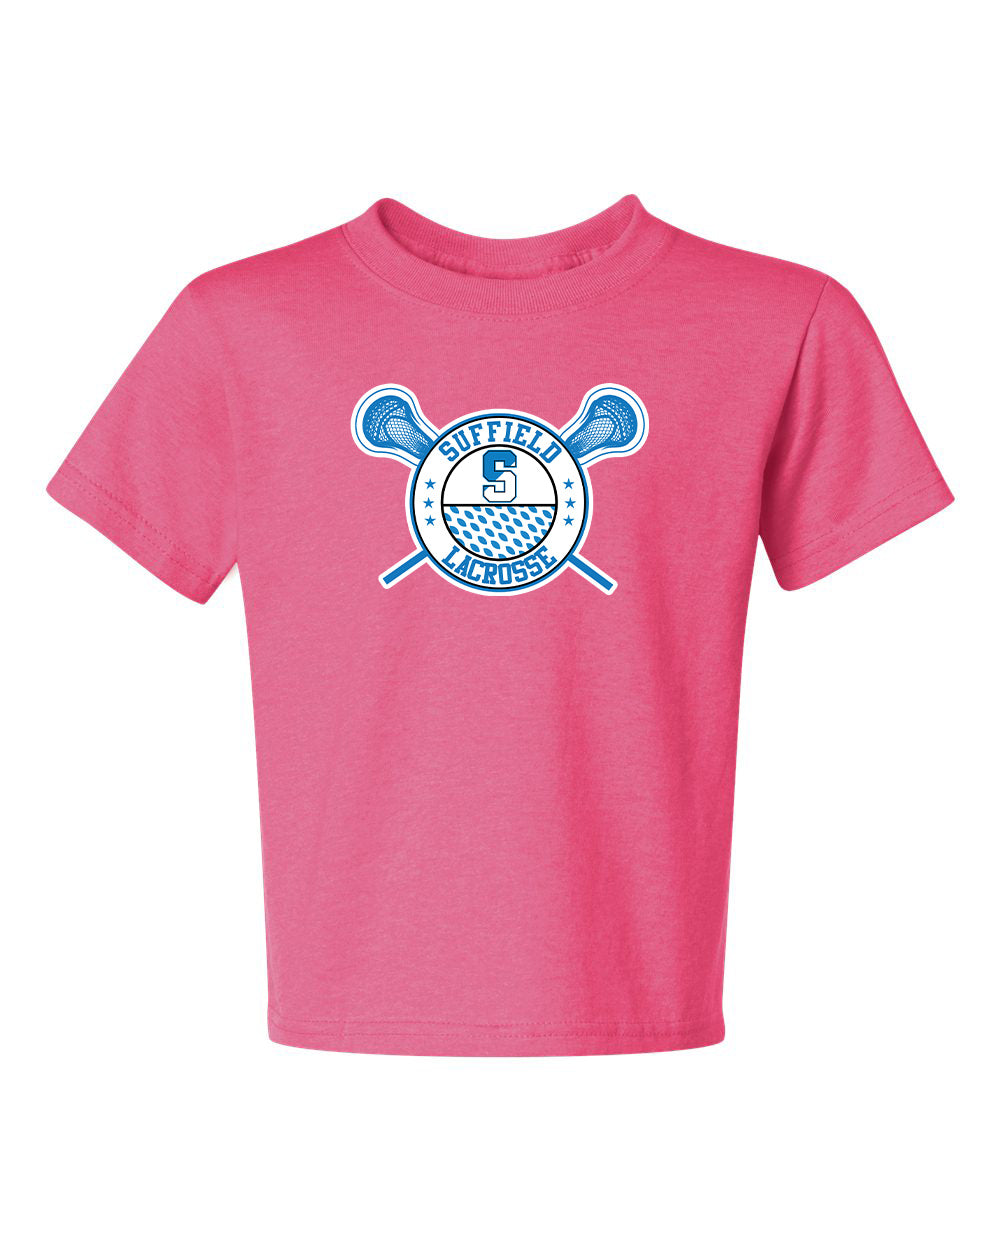 Suffield Youth Lacrosse Tee "Circle" - 29B (color options available)